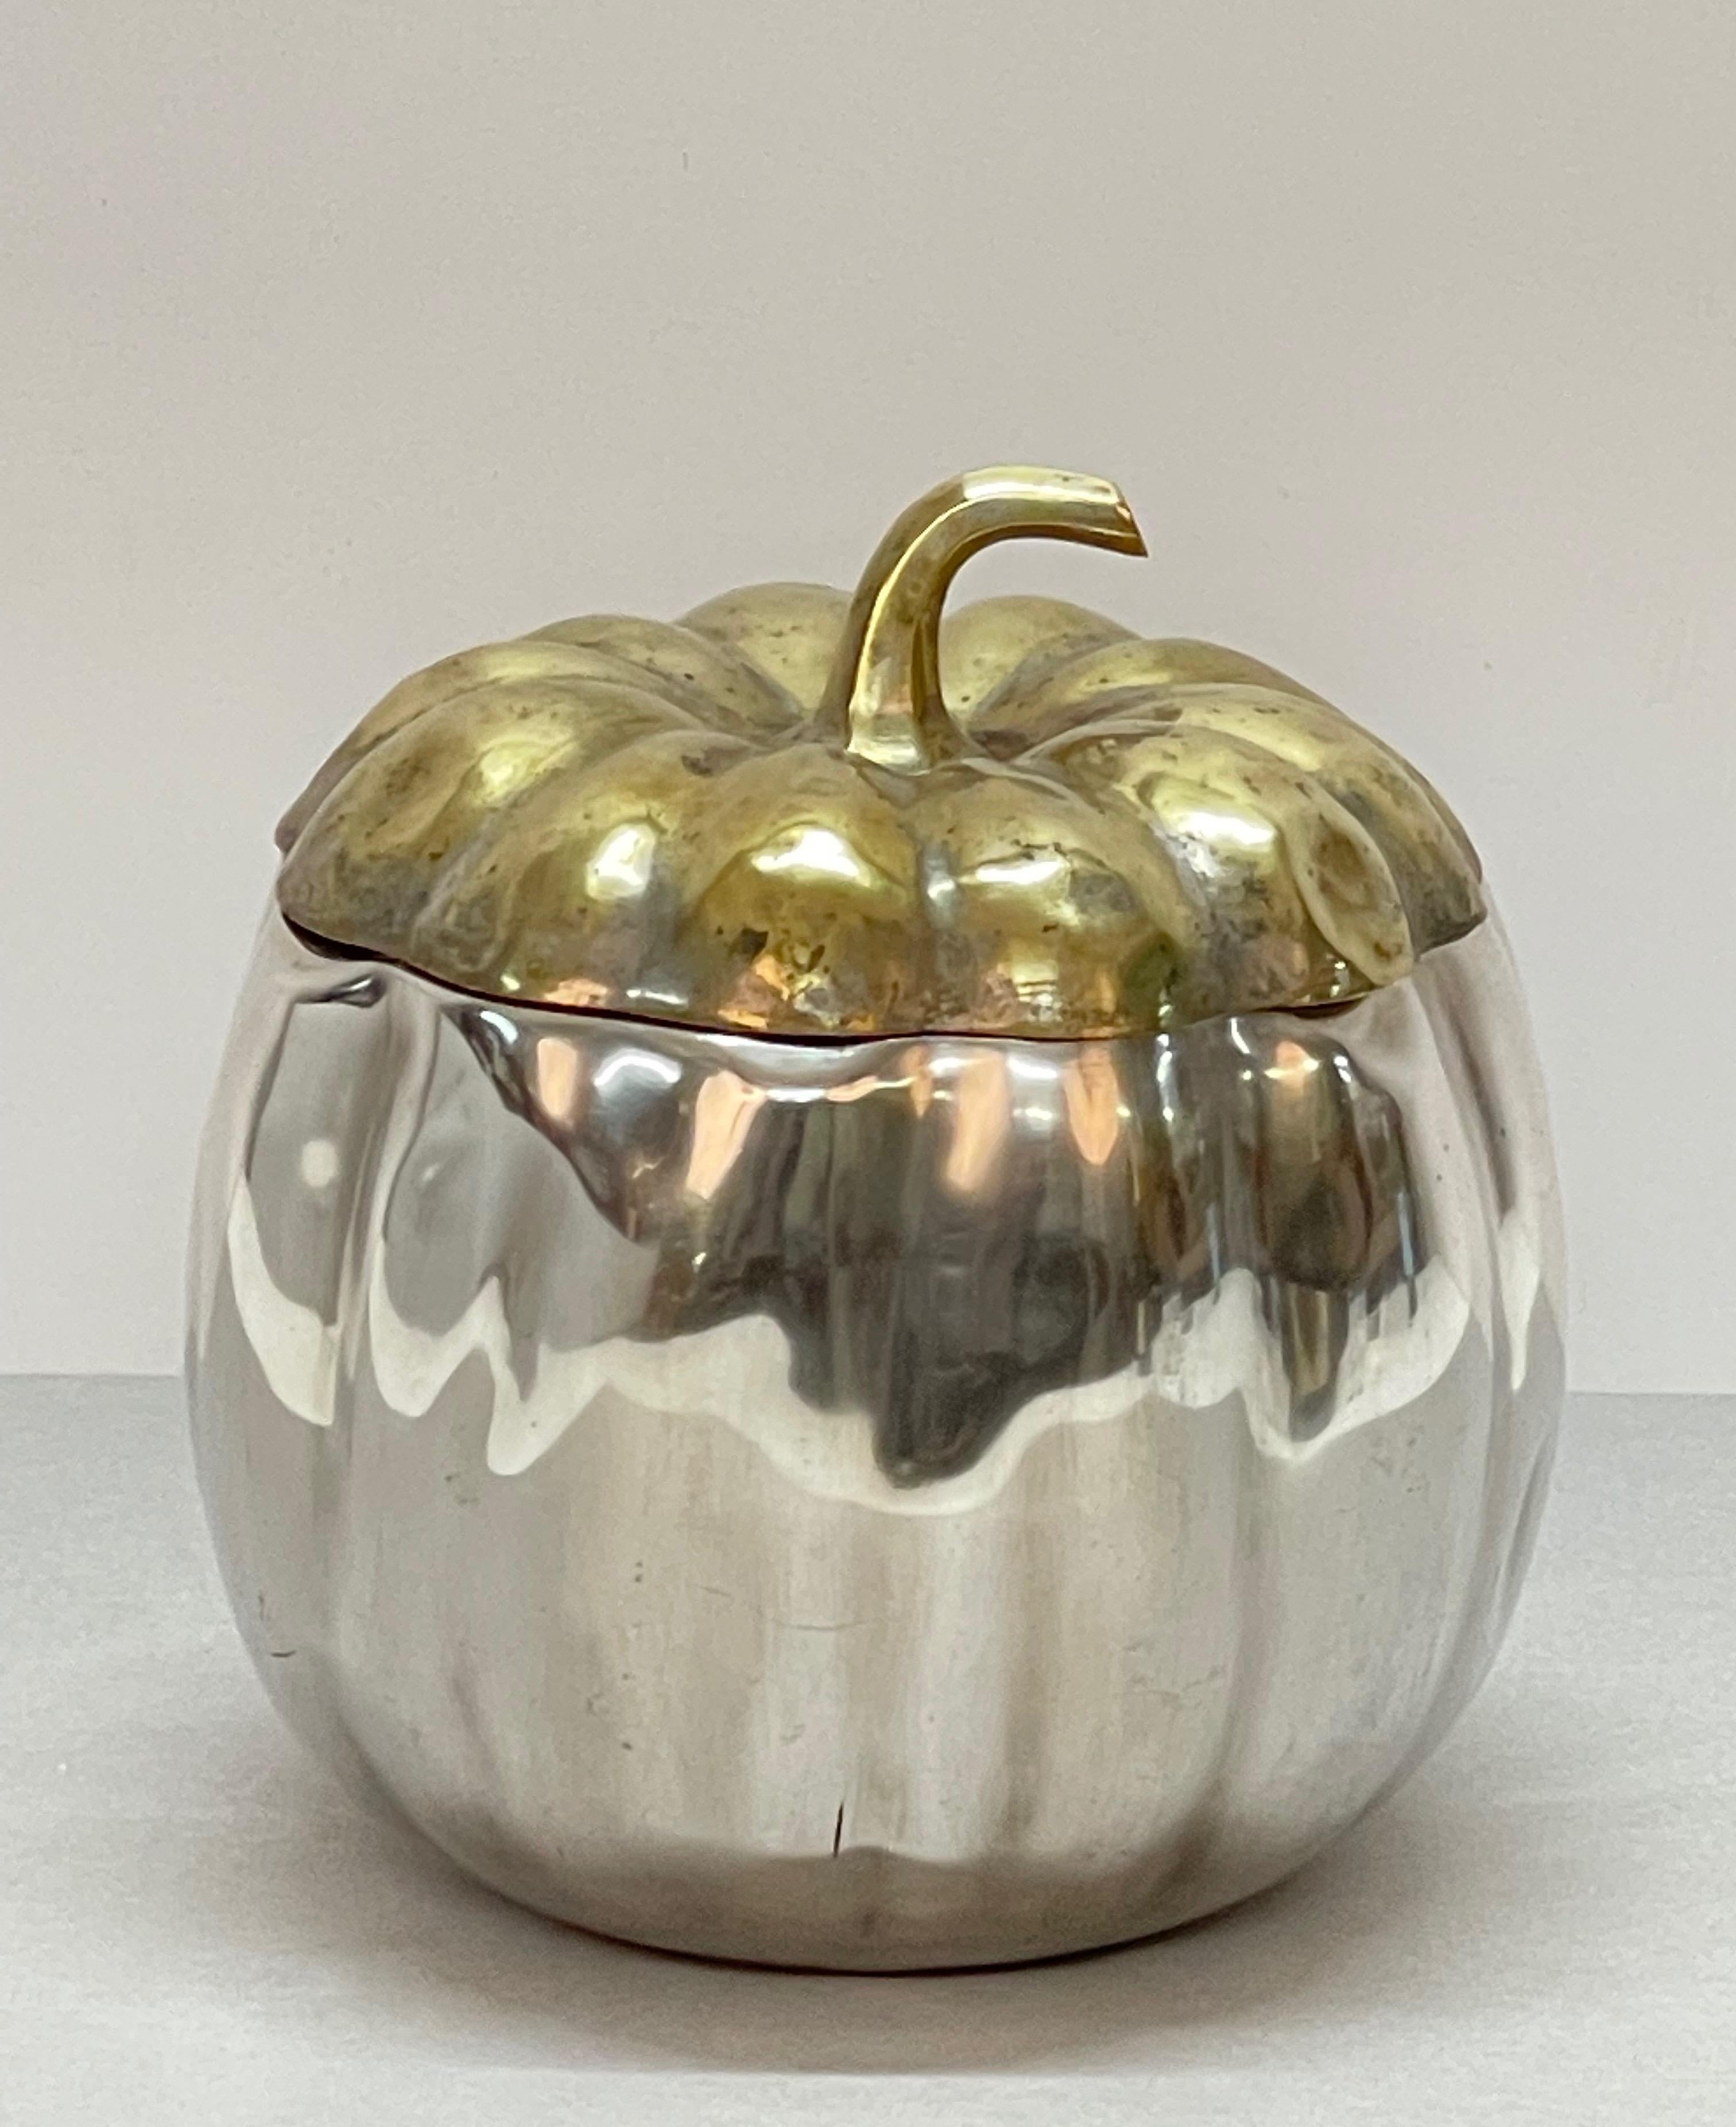 Teghini Firenze Midcentury Italian Silver and Brass Ice Bucket with Pumpkin Top 1